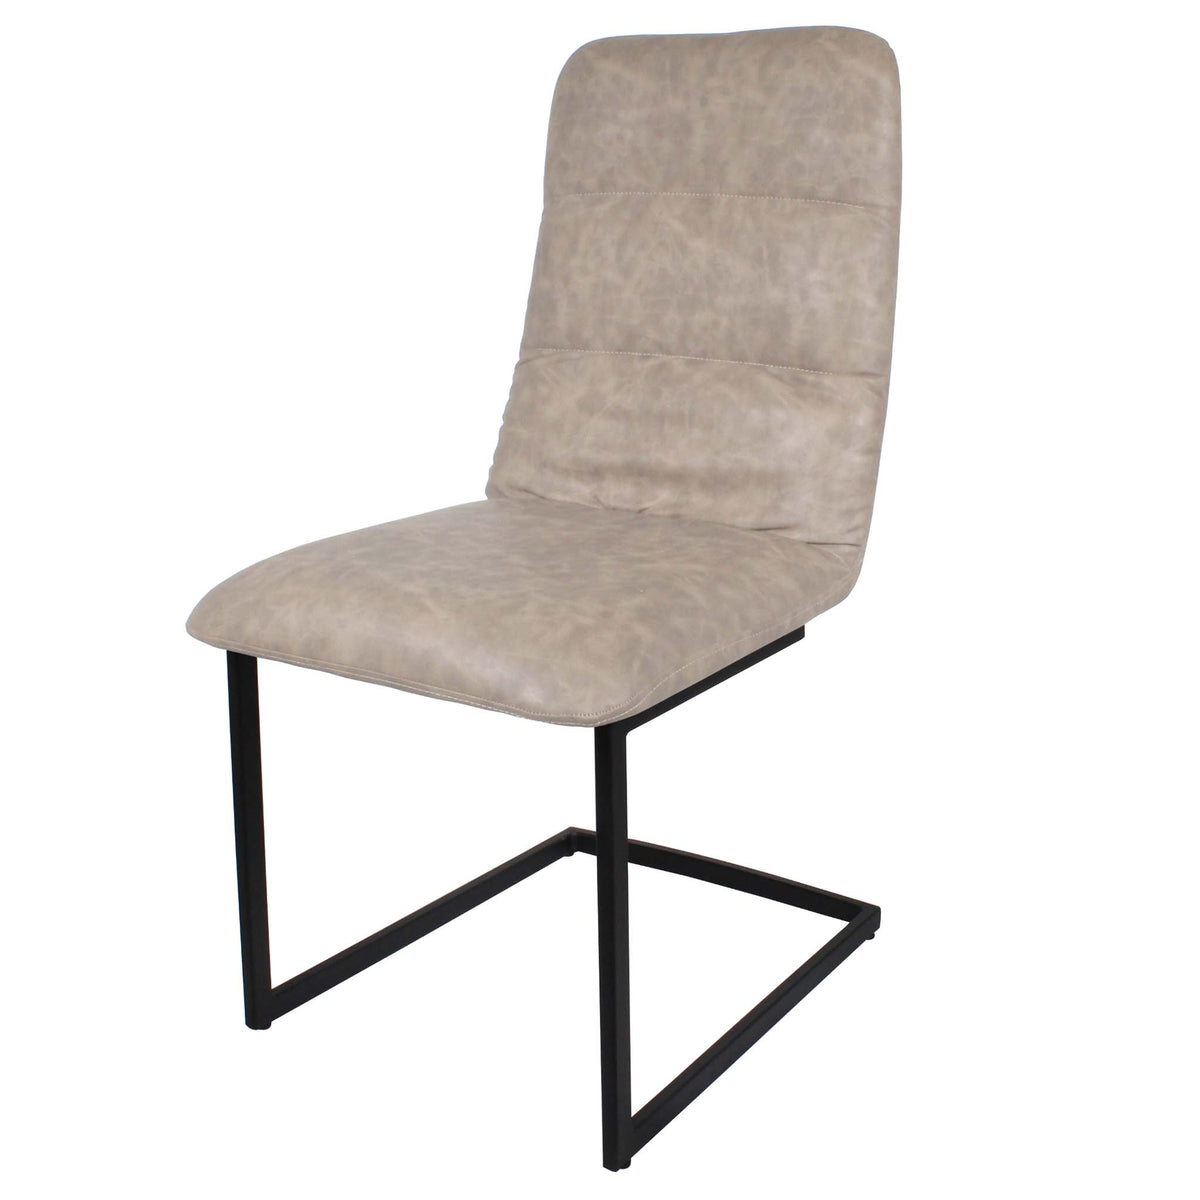 Mottled Elk Maitland Faux Leather Dining Chair by Roseland Furniture